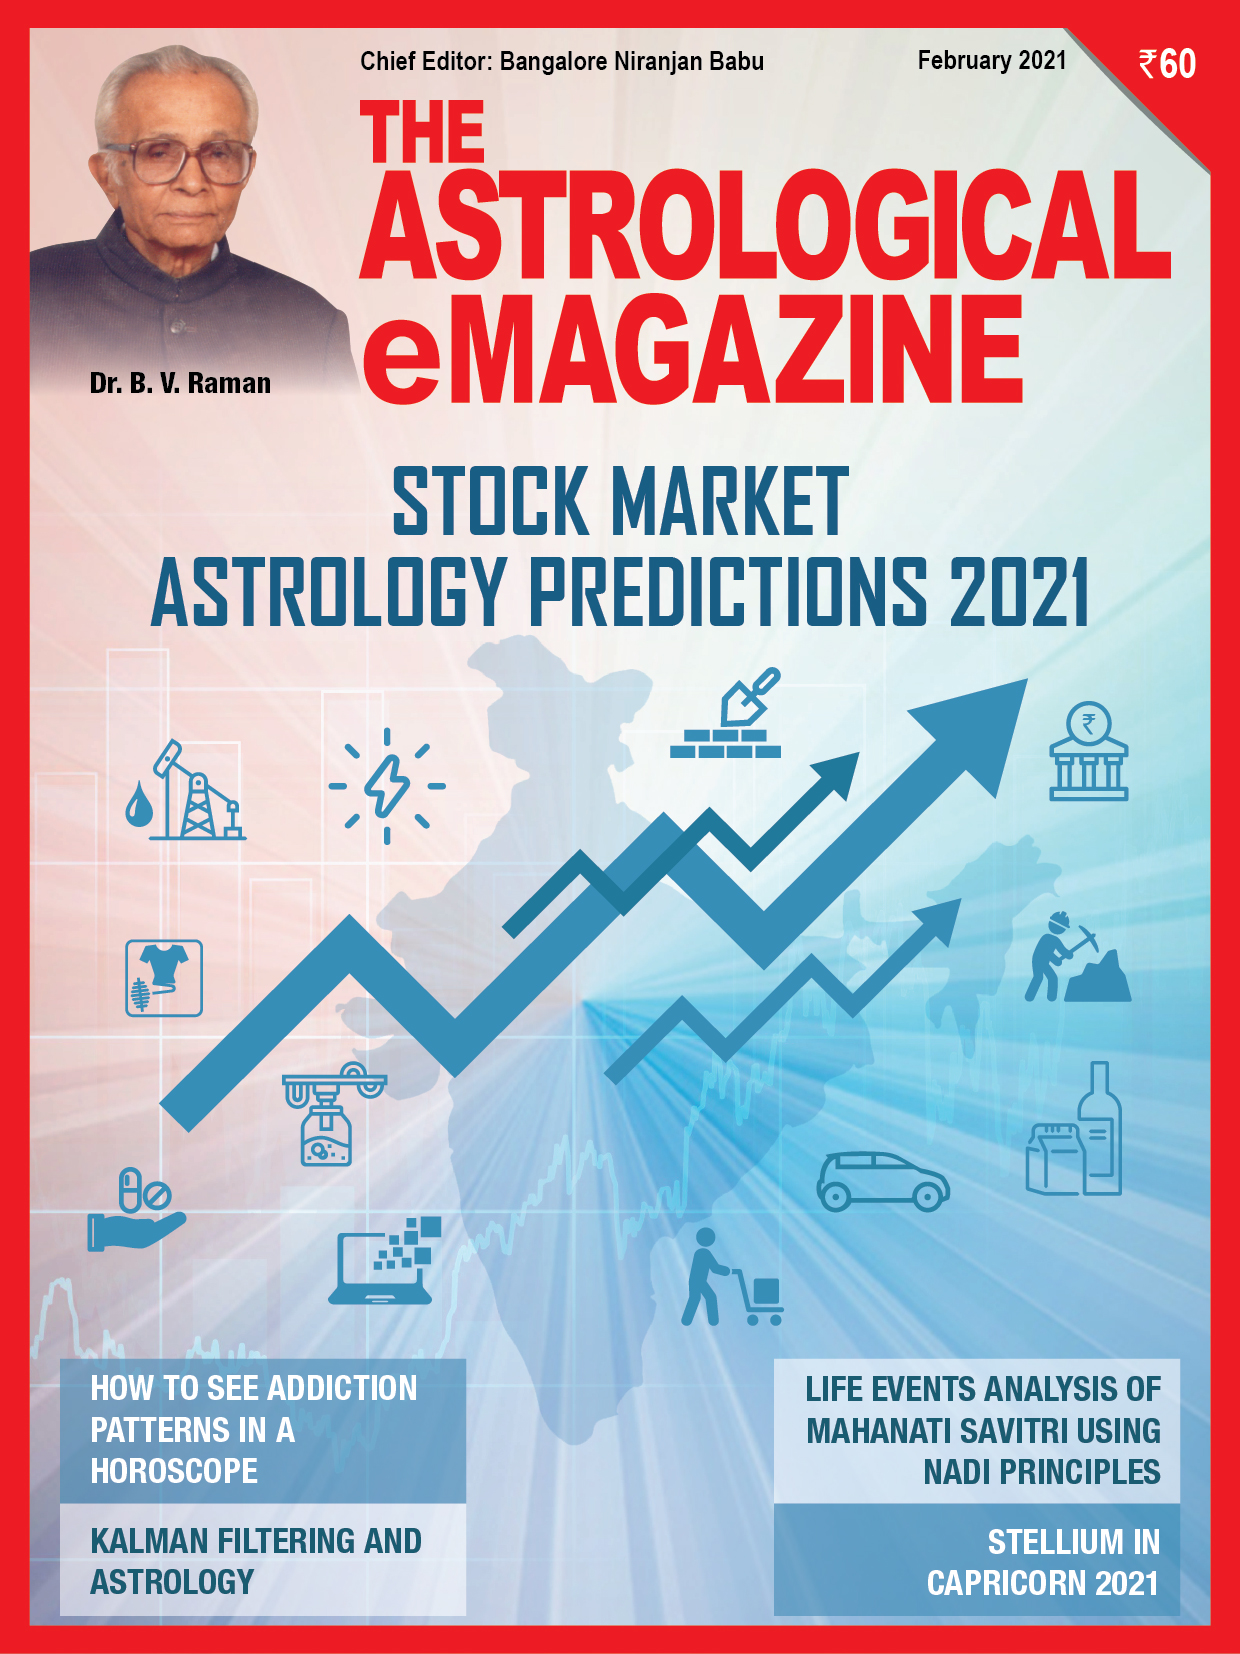 February 2021 issue of The Astrological eMagazine